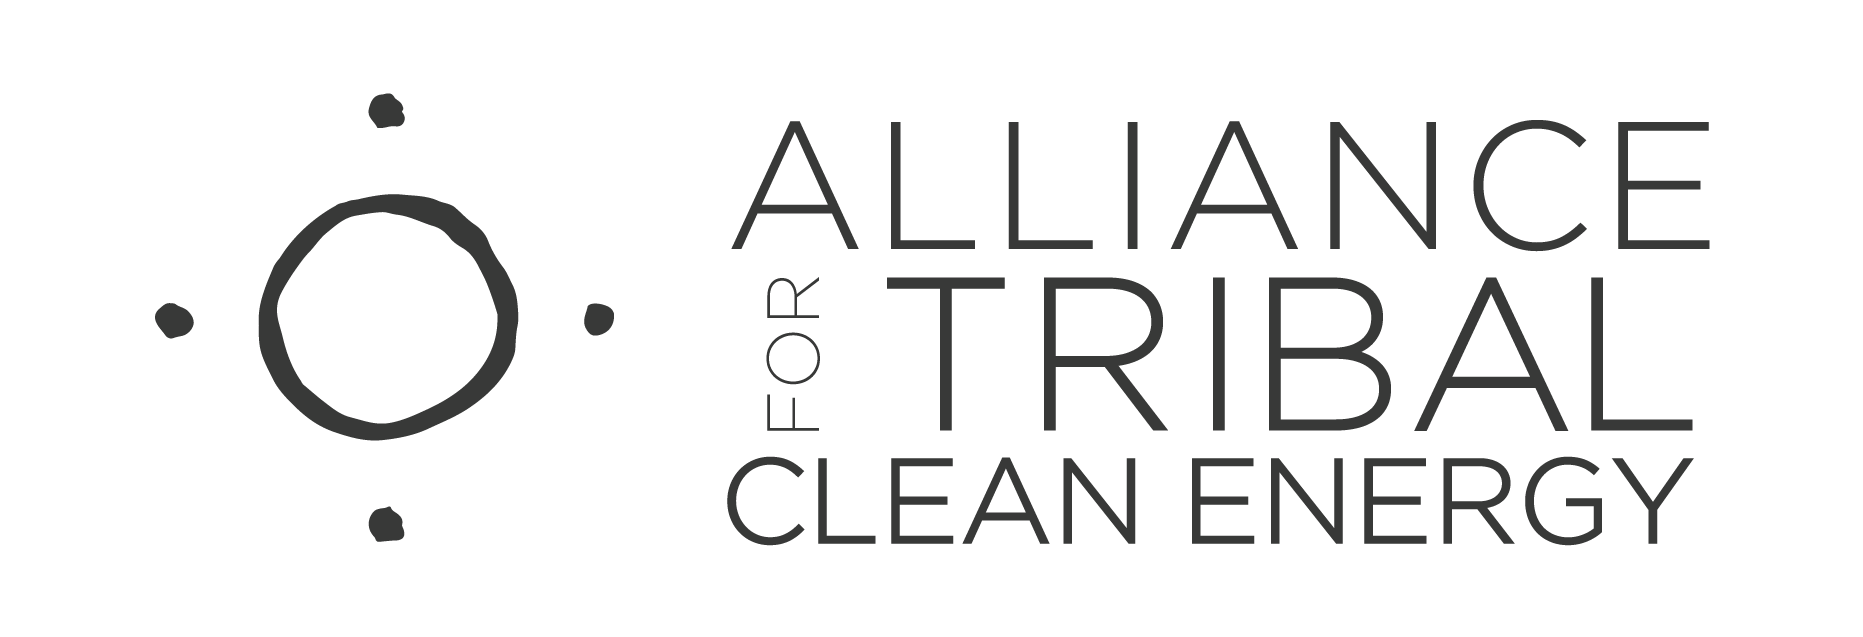 The Alliance for Tribal Clean Energy